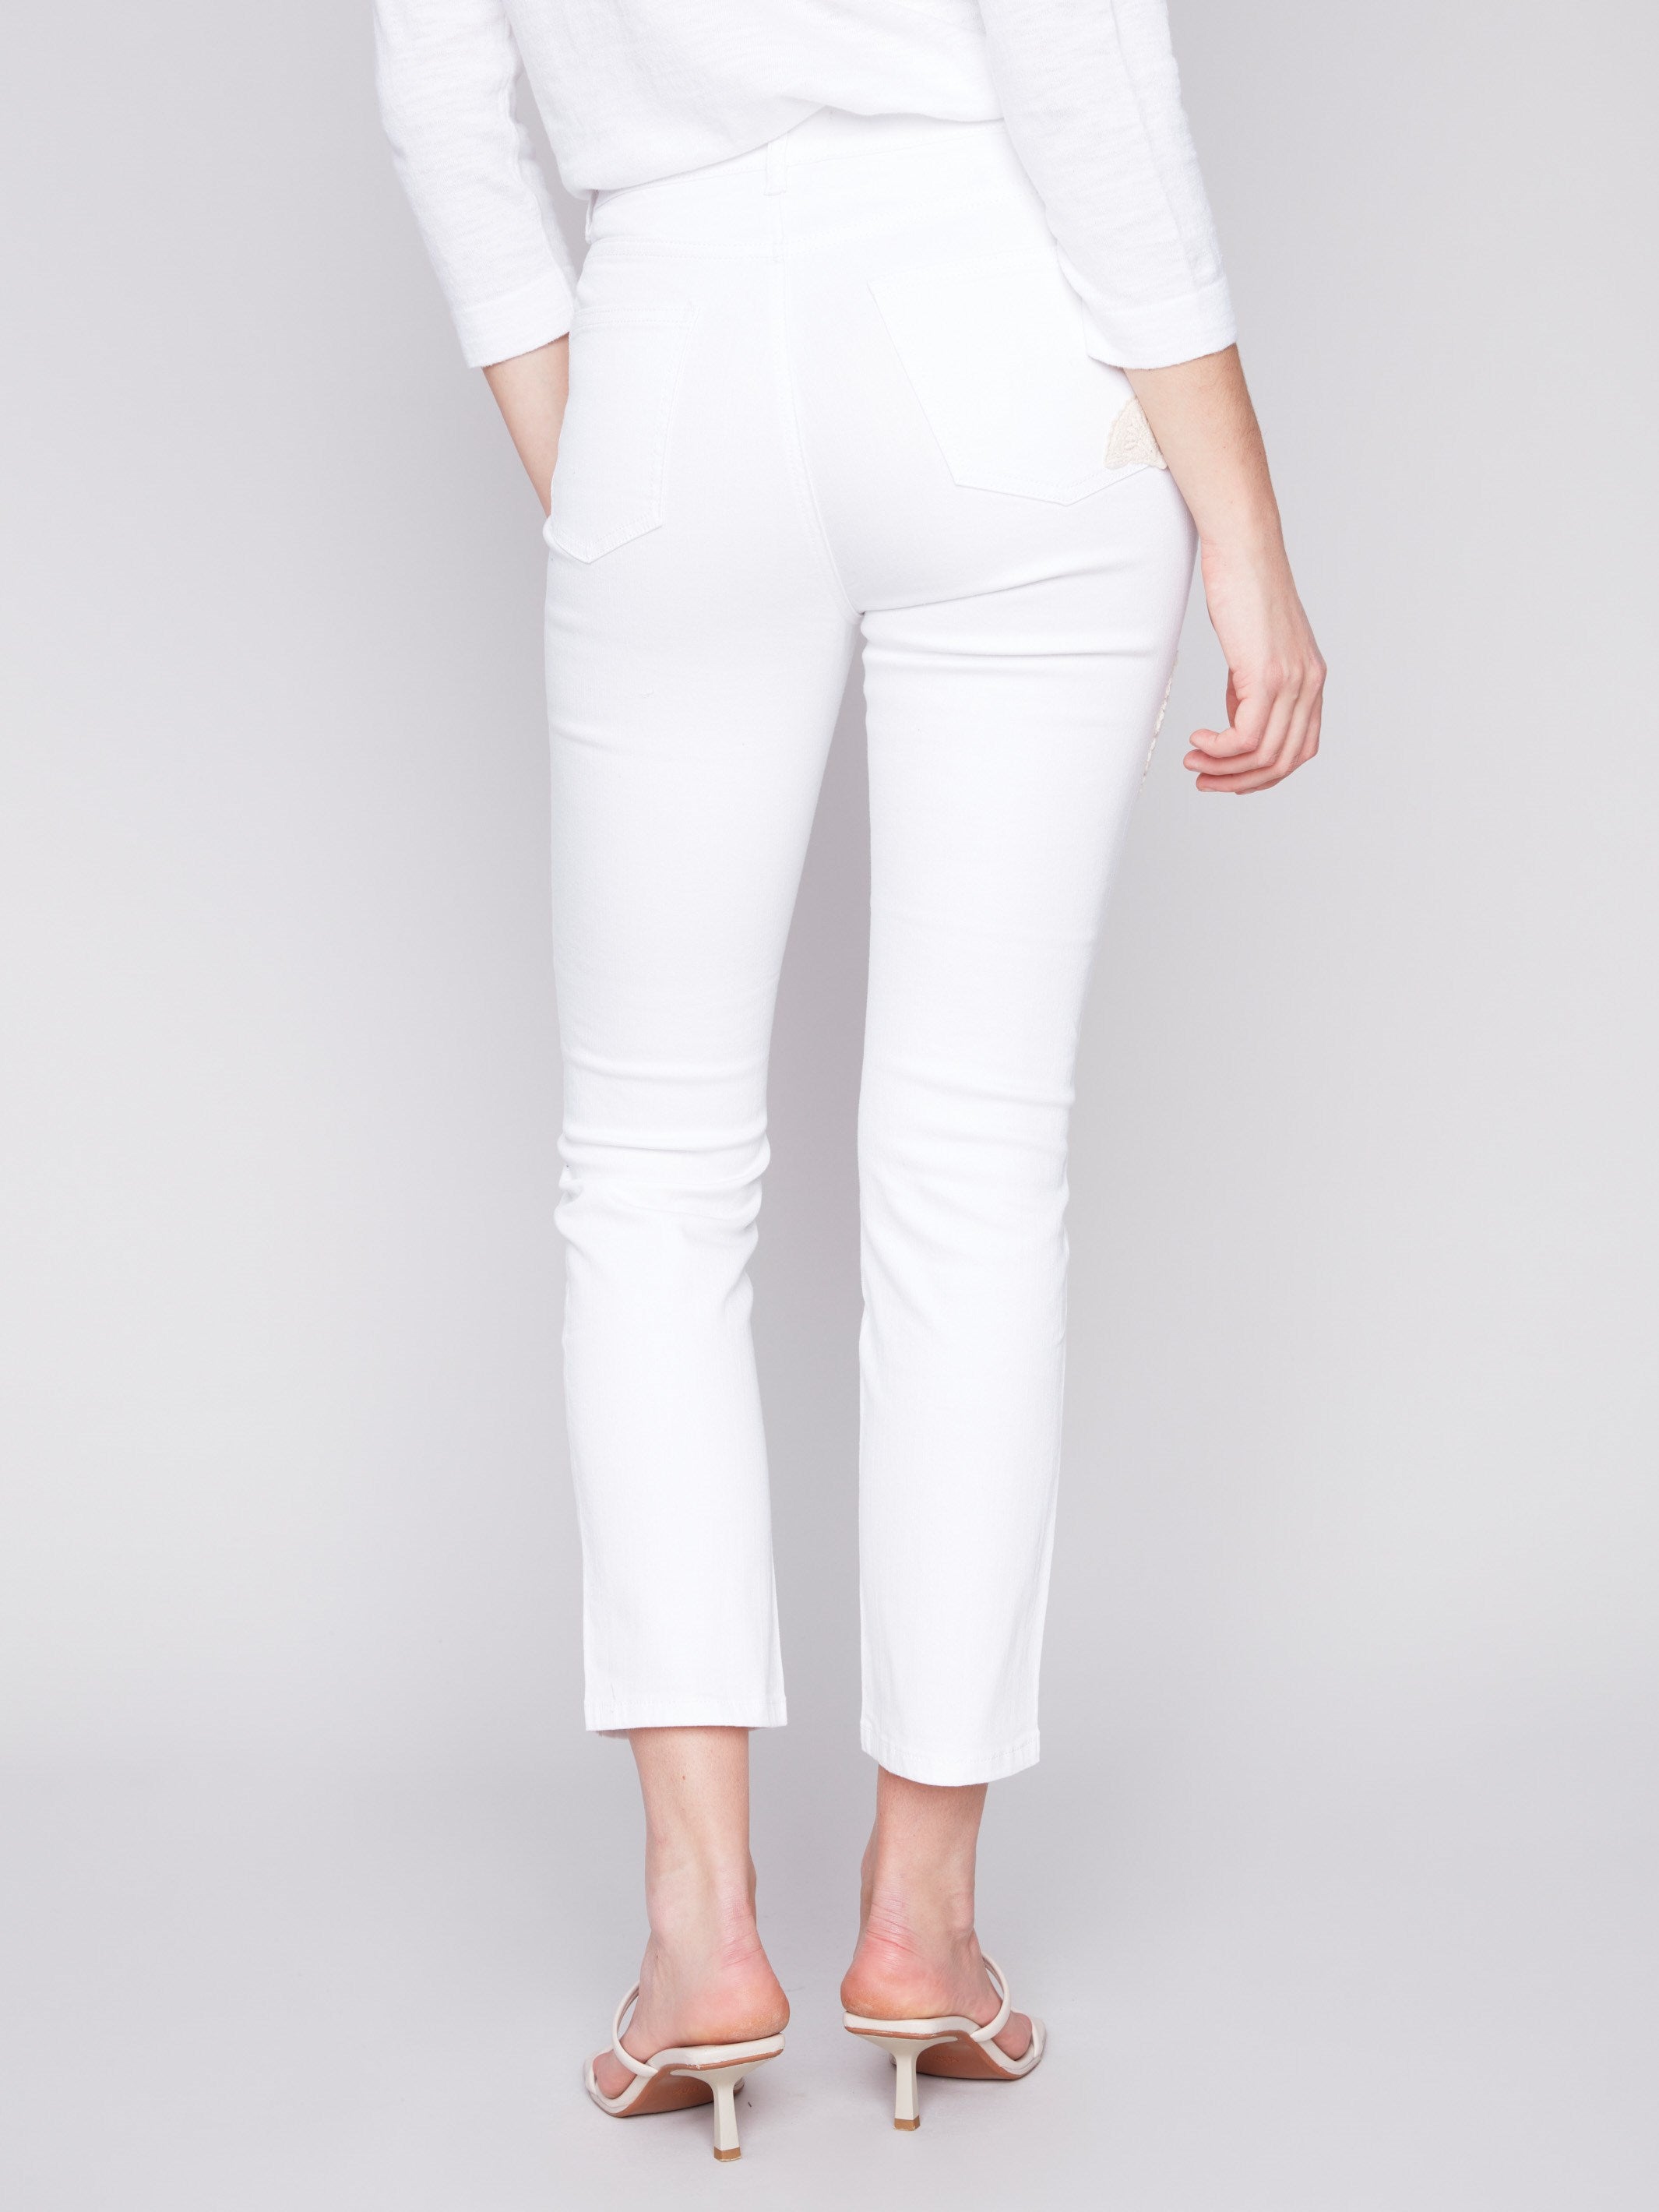 Charlie B Jeans with Crochet Patch Details - White - Image 3